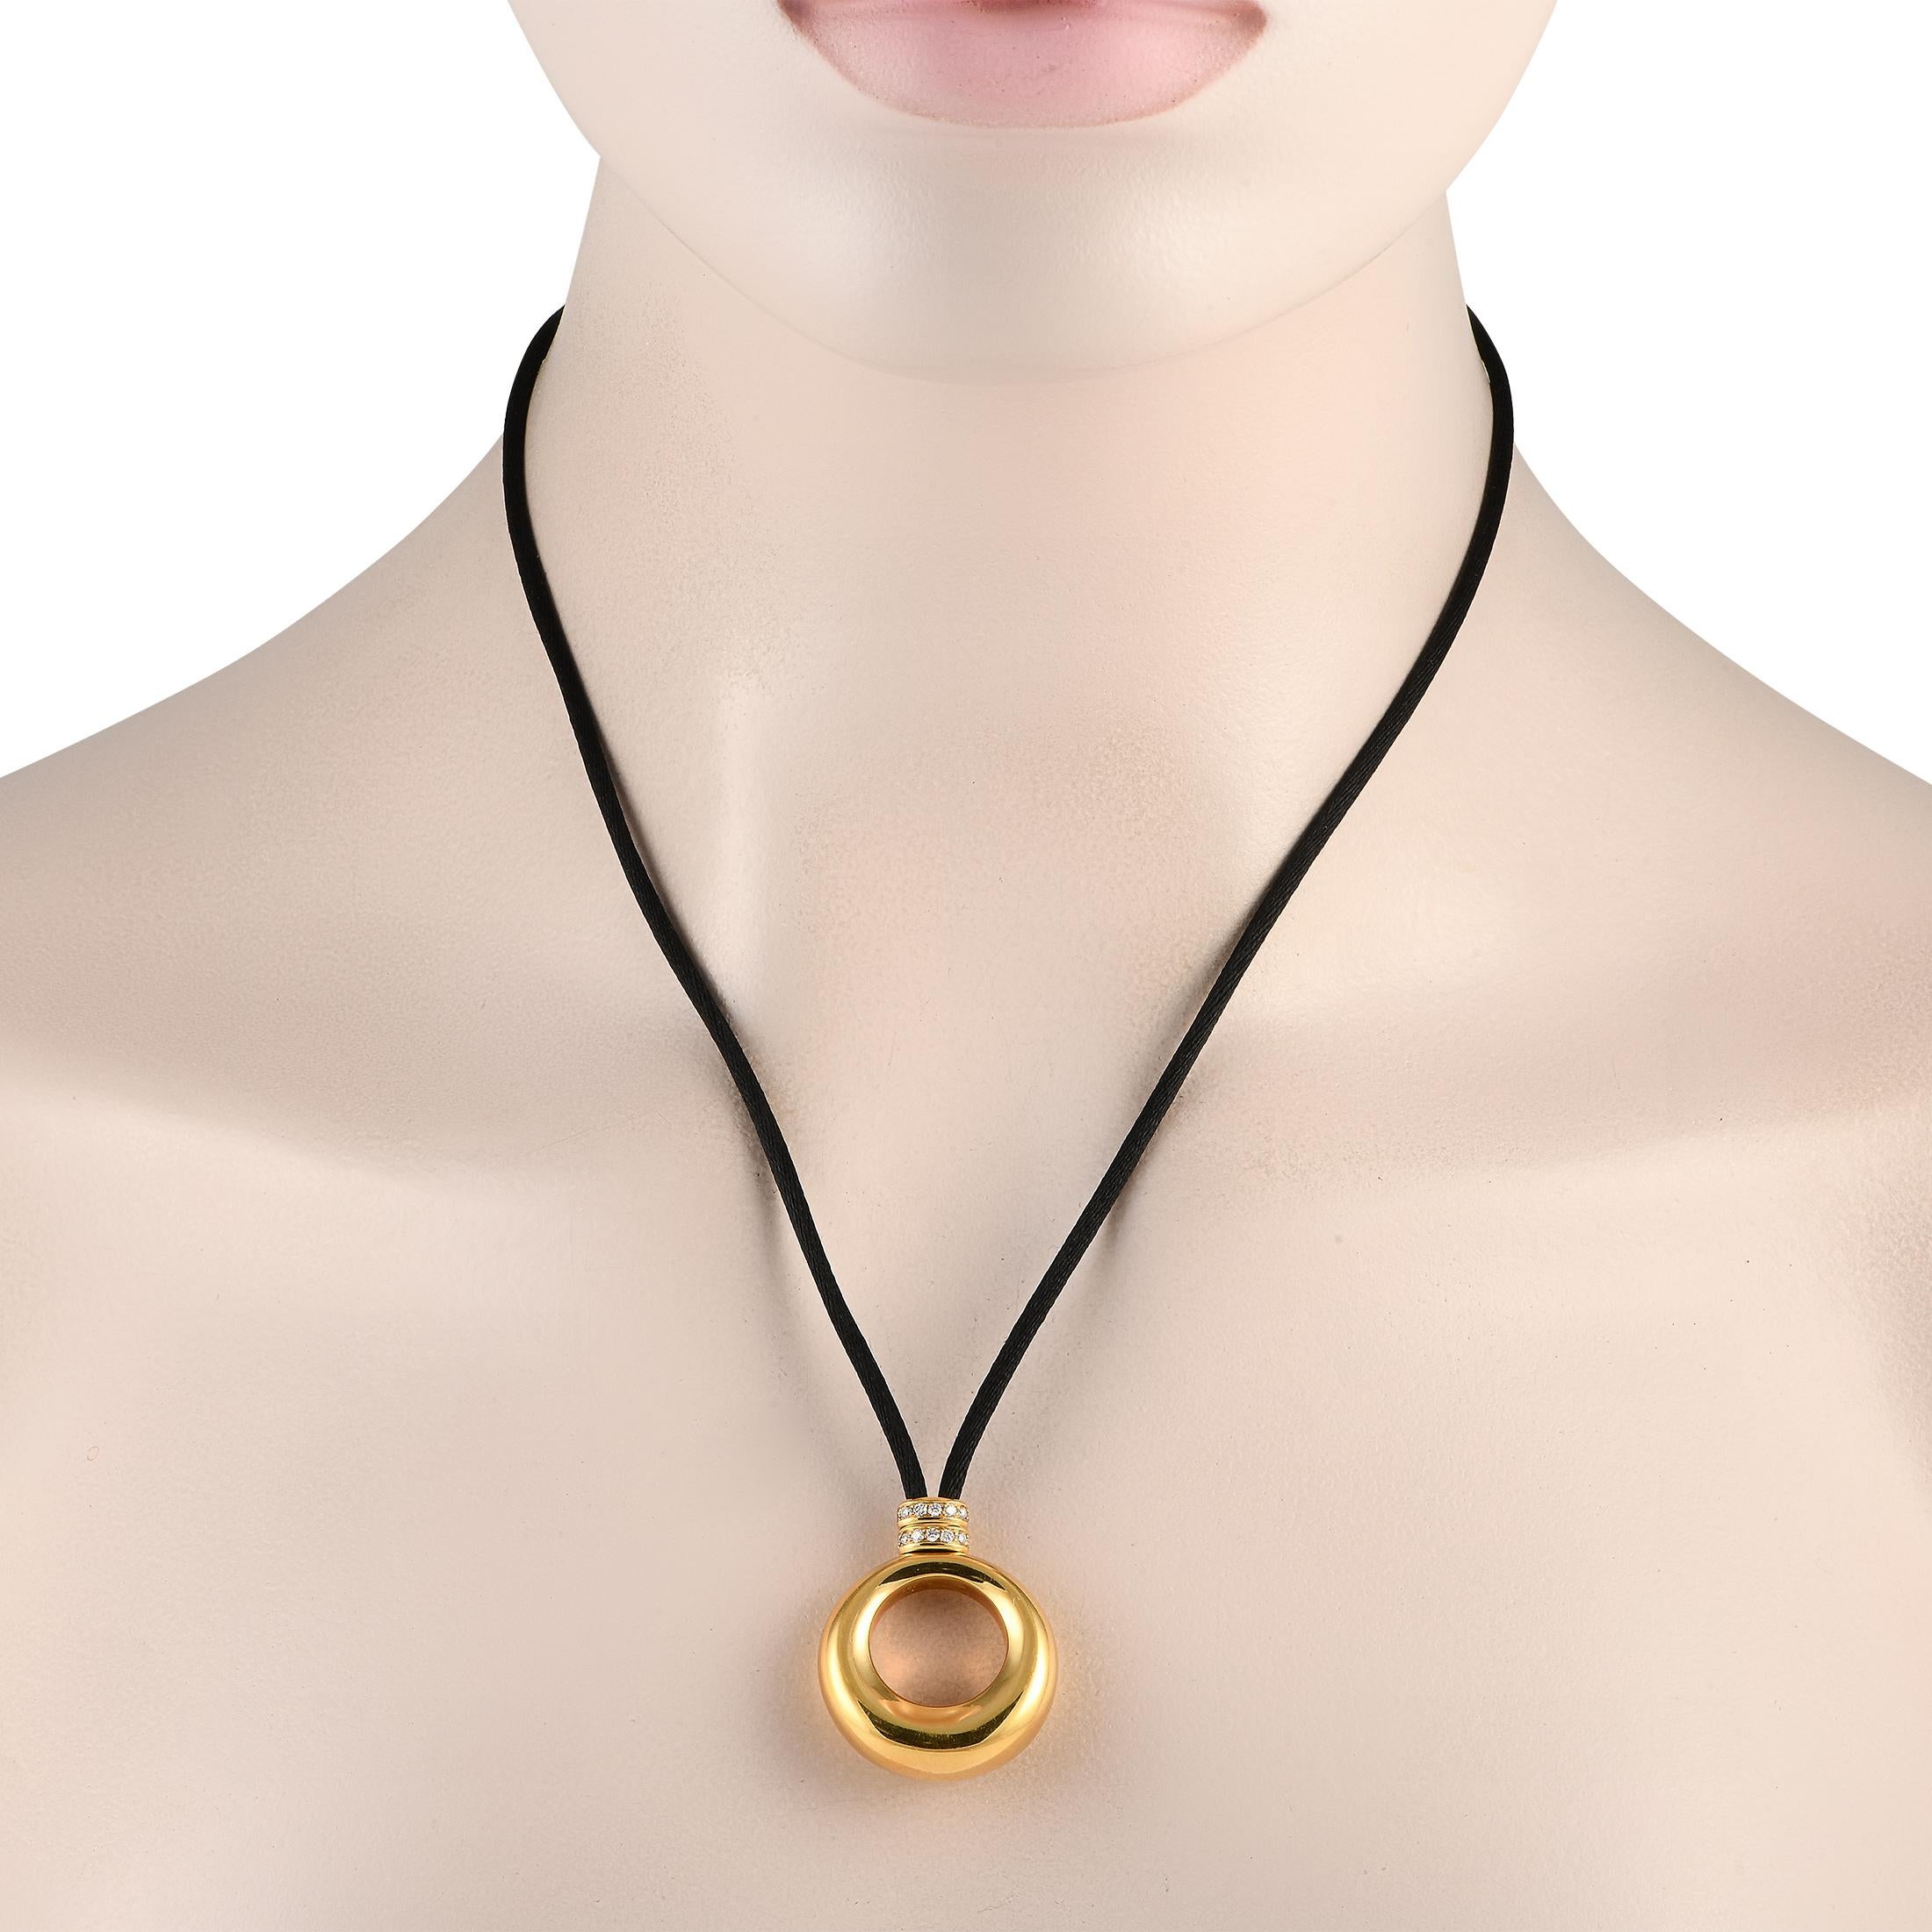 This Chaumet necklace possesses an understated elegance. Suspended from a 30 silk cord, youll find a sleek, sophisticated 18K Yellow Gold pendant measuring 1.45 long by 1.0 wide. Diamond accents at the base of the pendant make it even more